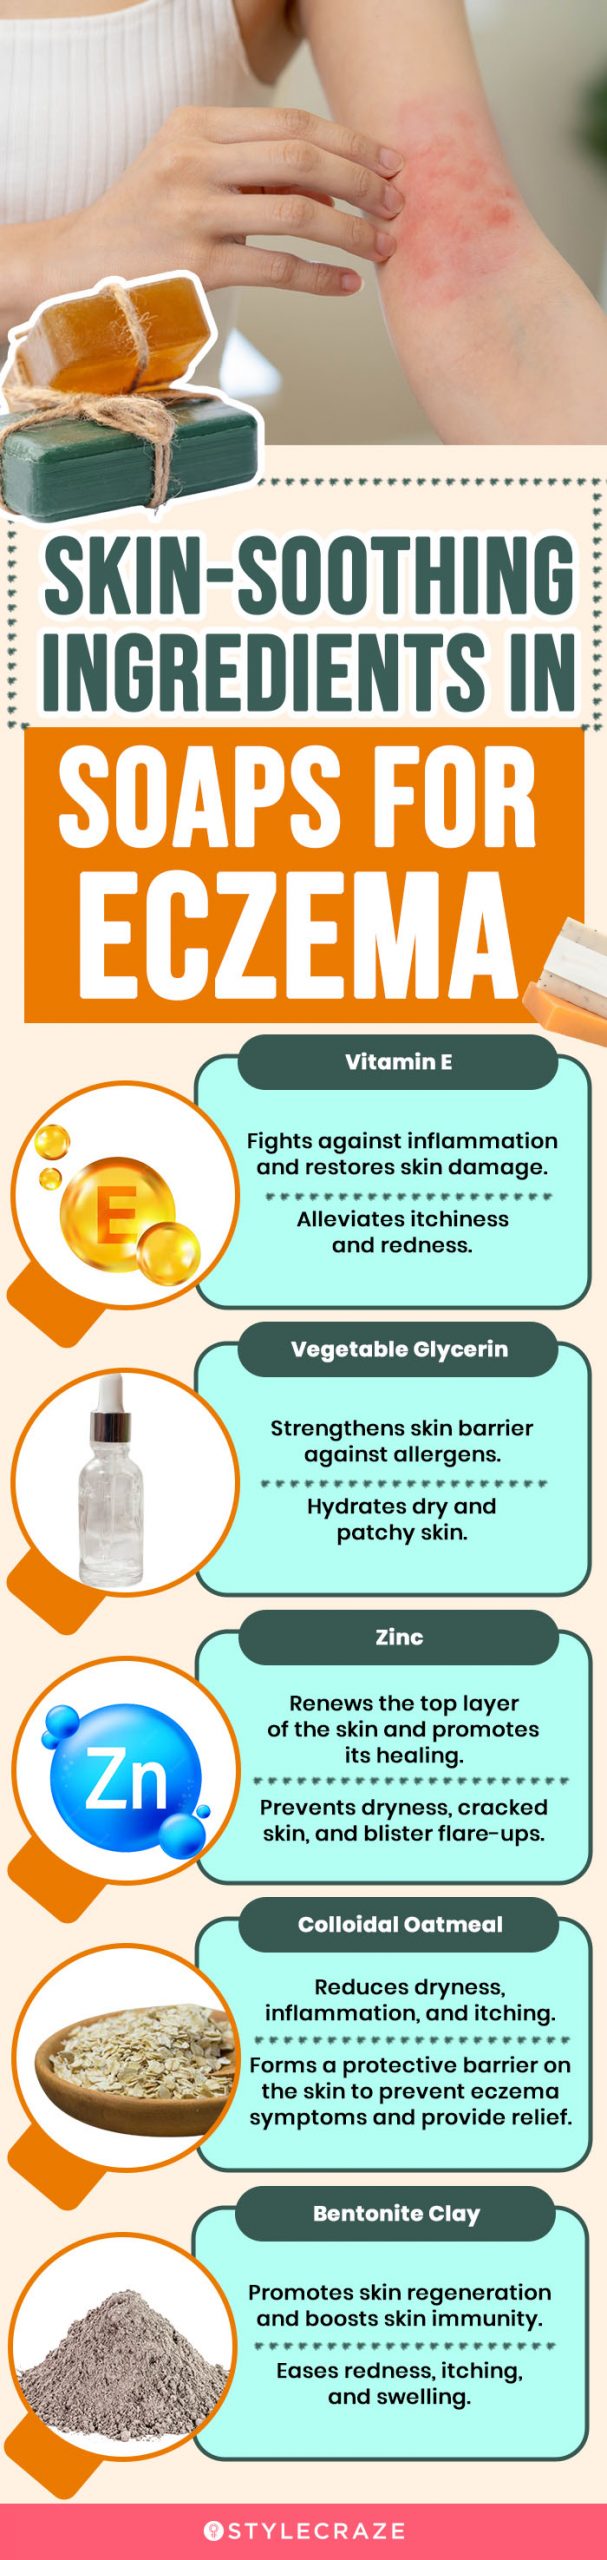 Skin-Soothing Ingredients In Soaps For Eczema (infographic)